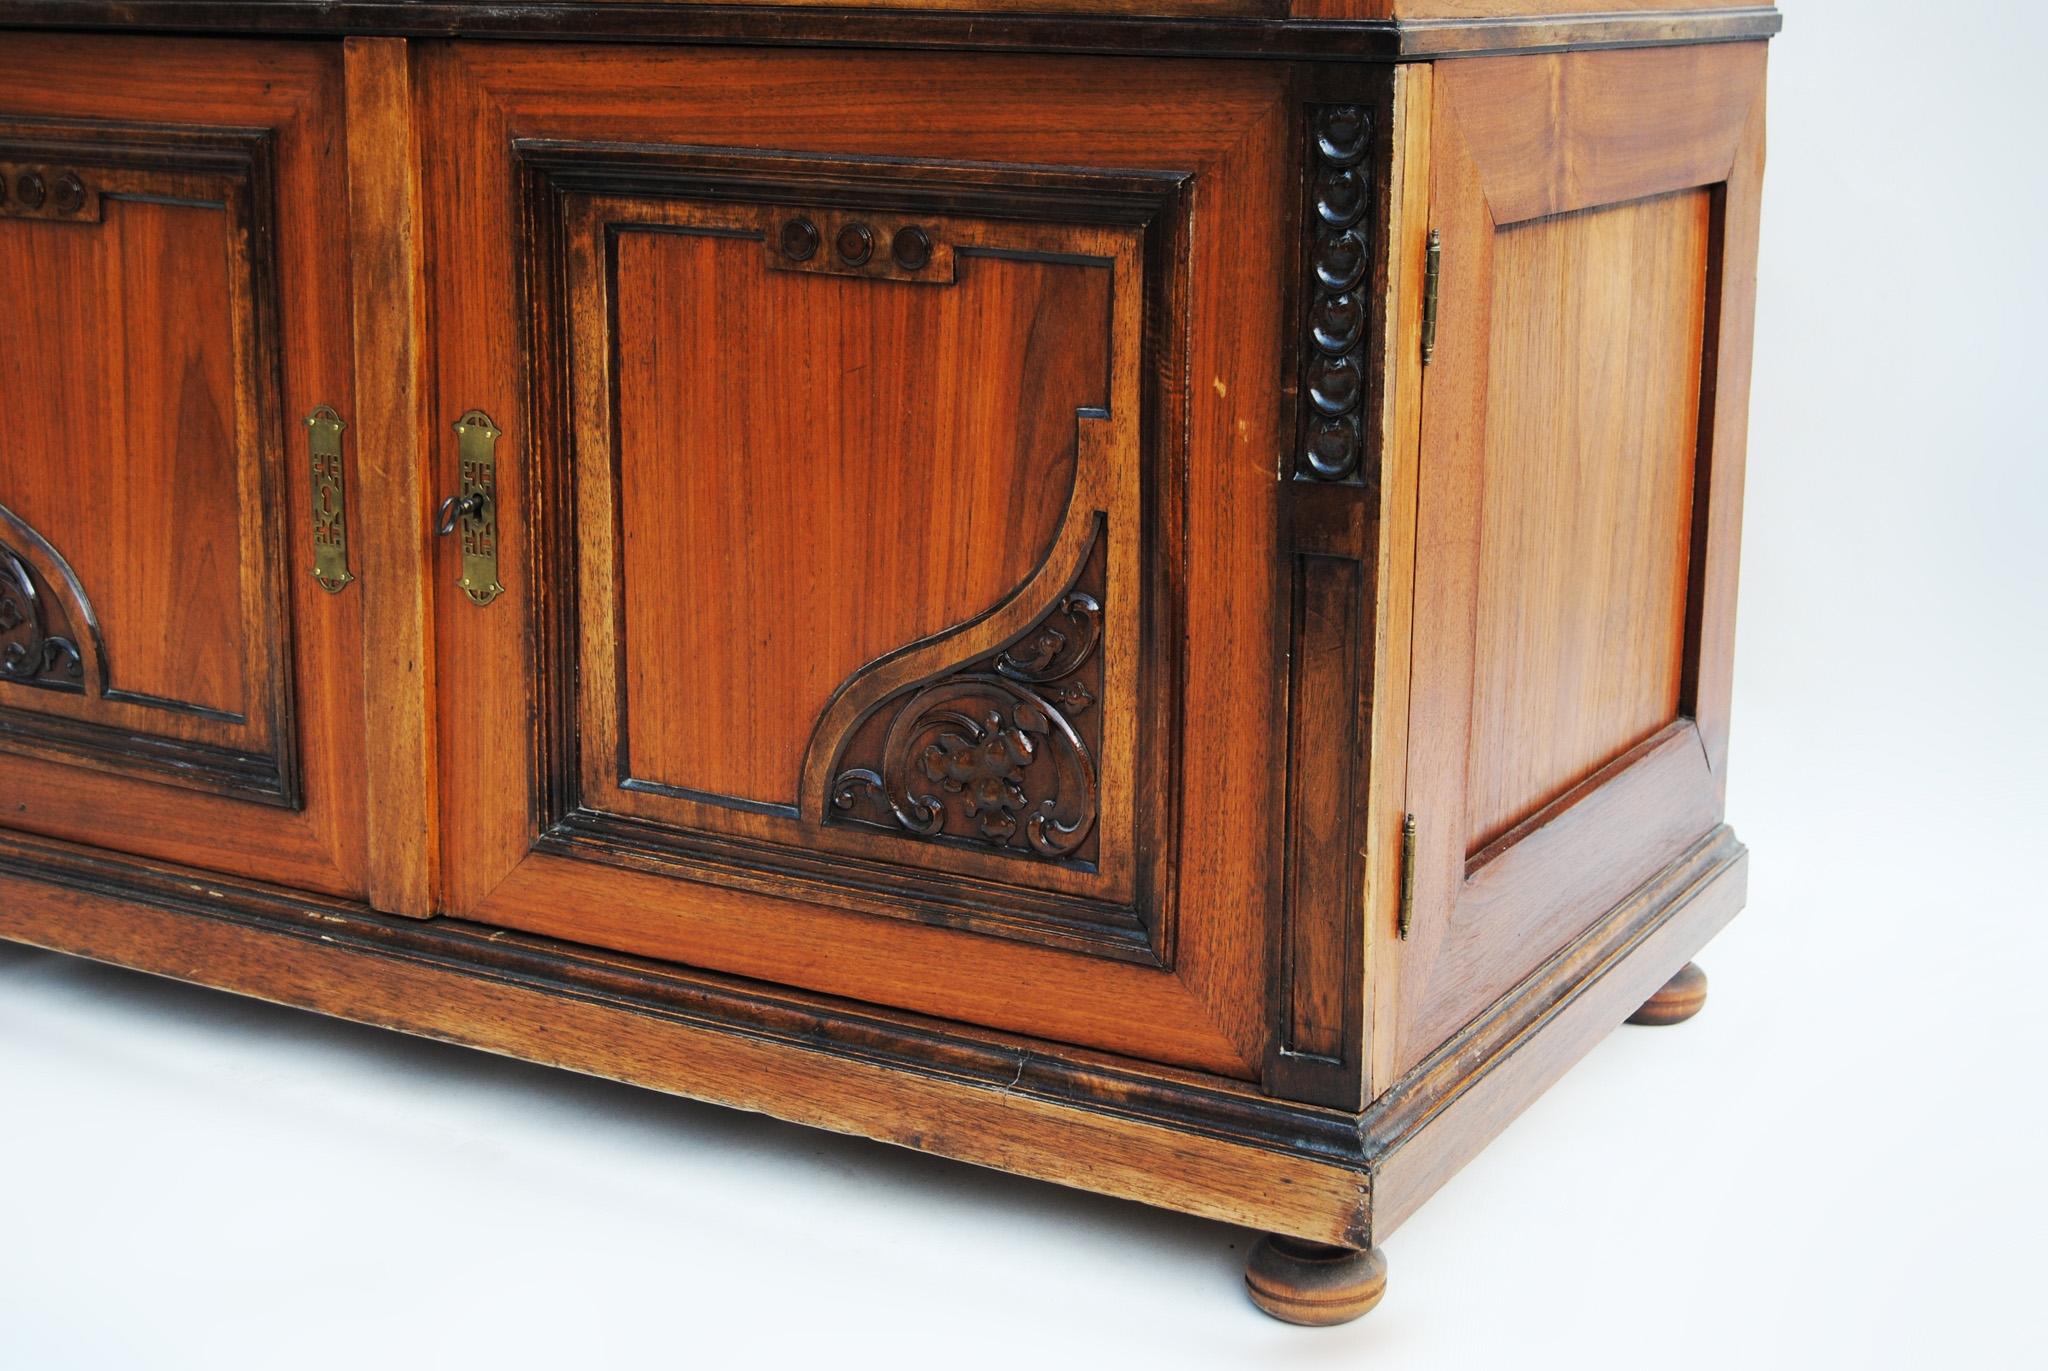 Czech Art Nouveau Dressing Table with Mirror, Walnut, Restored, 1910s For Sale 2